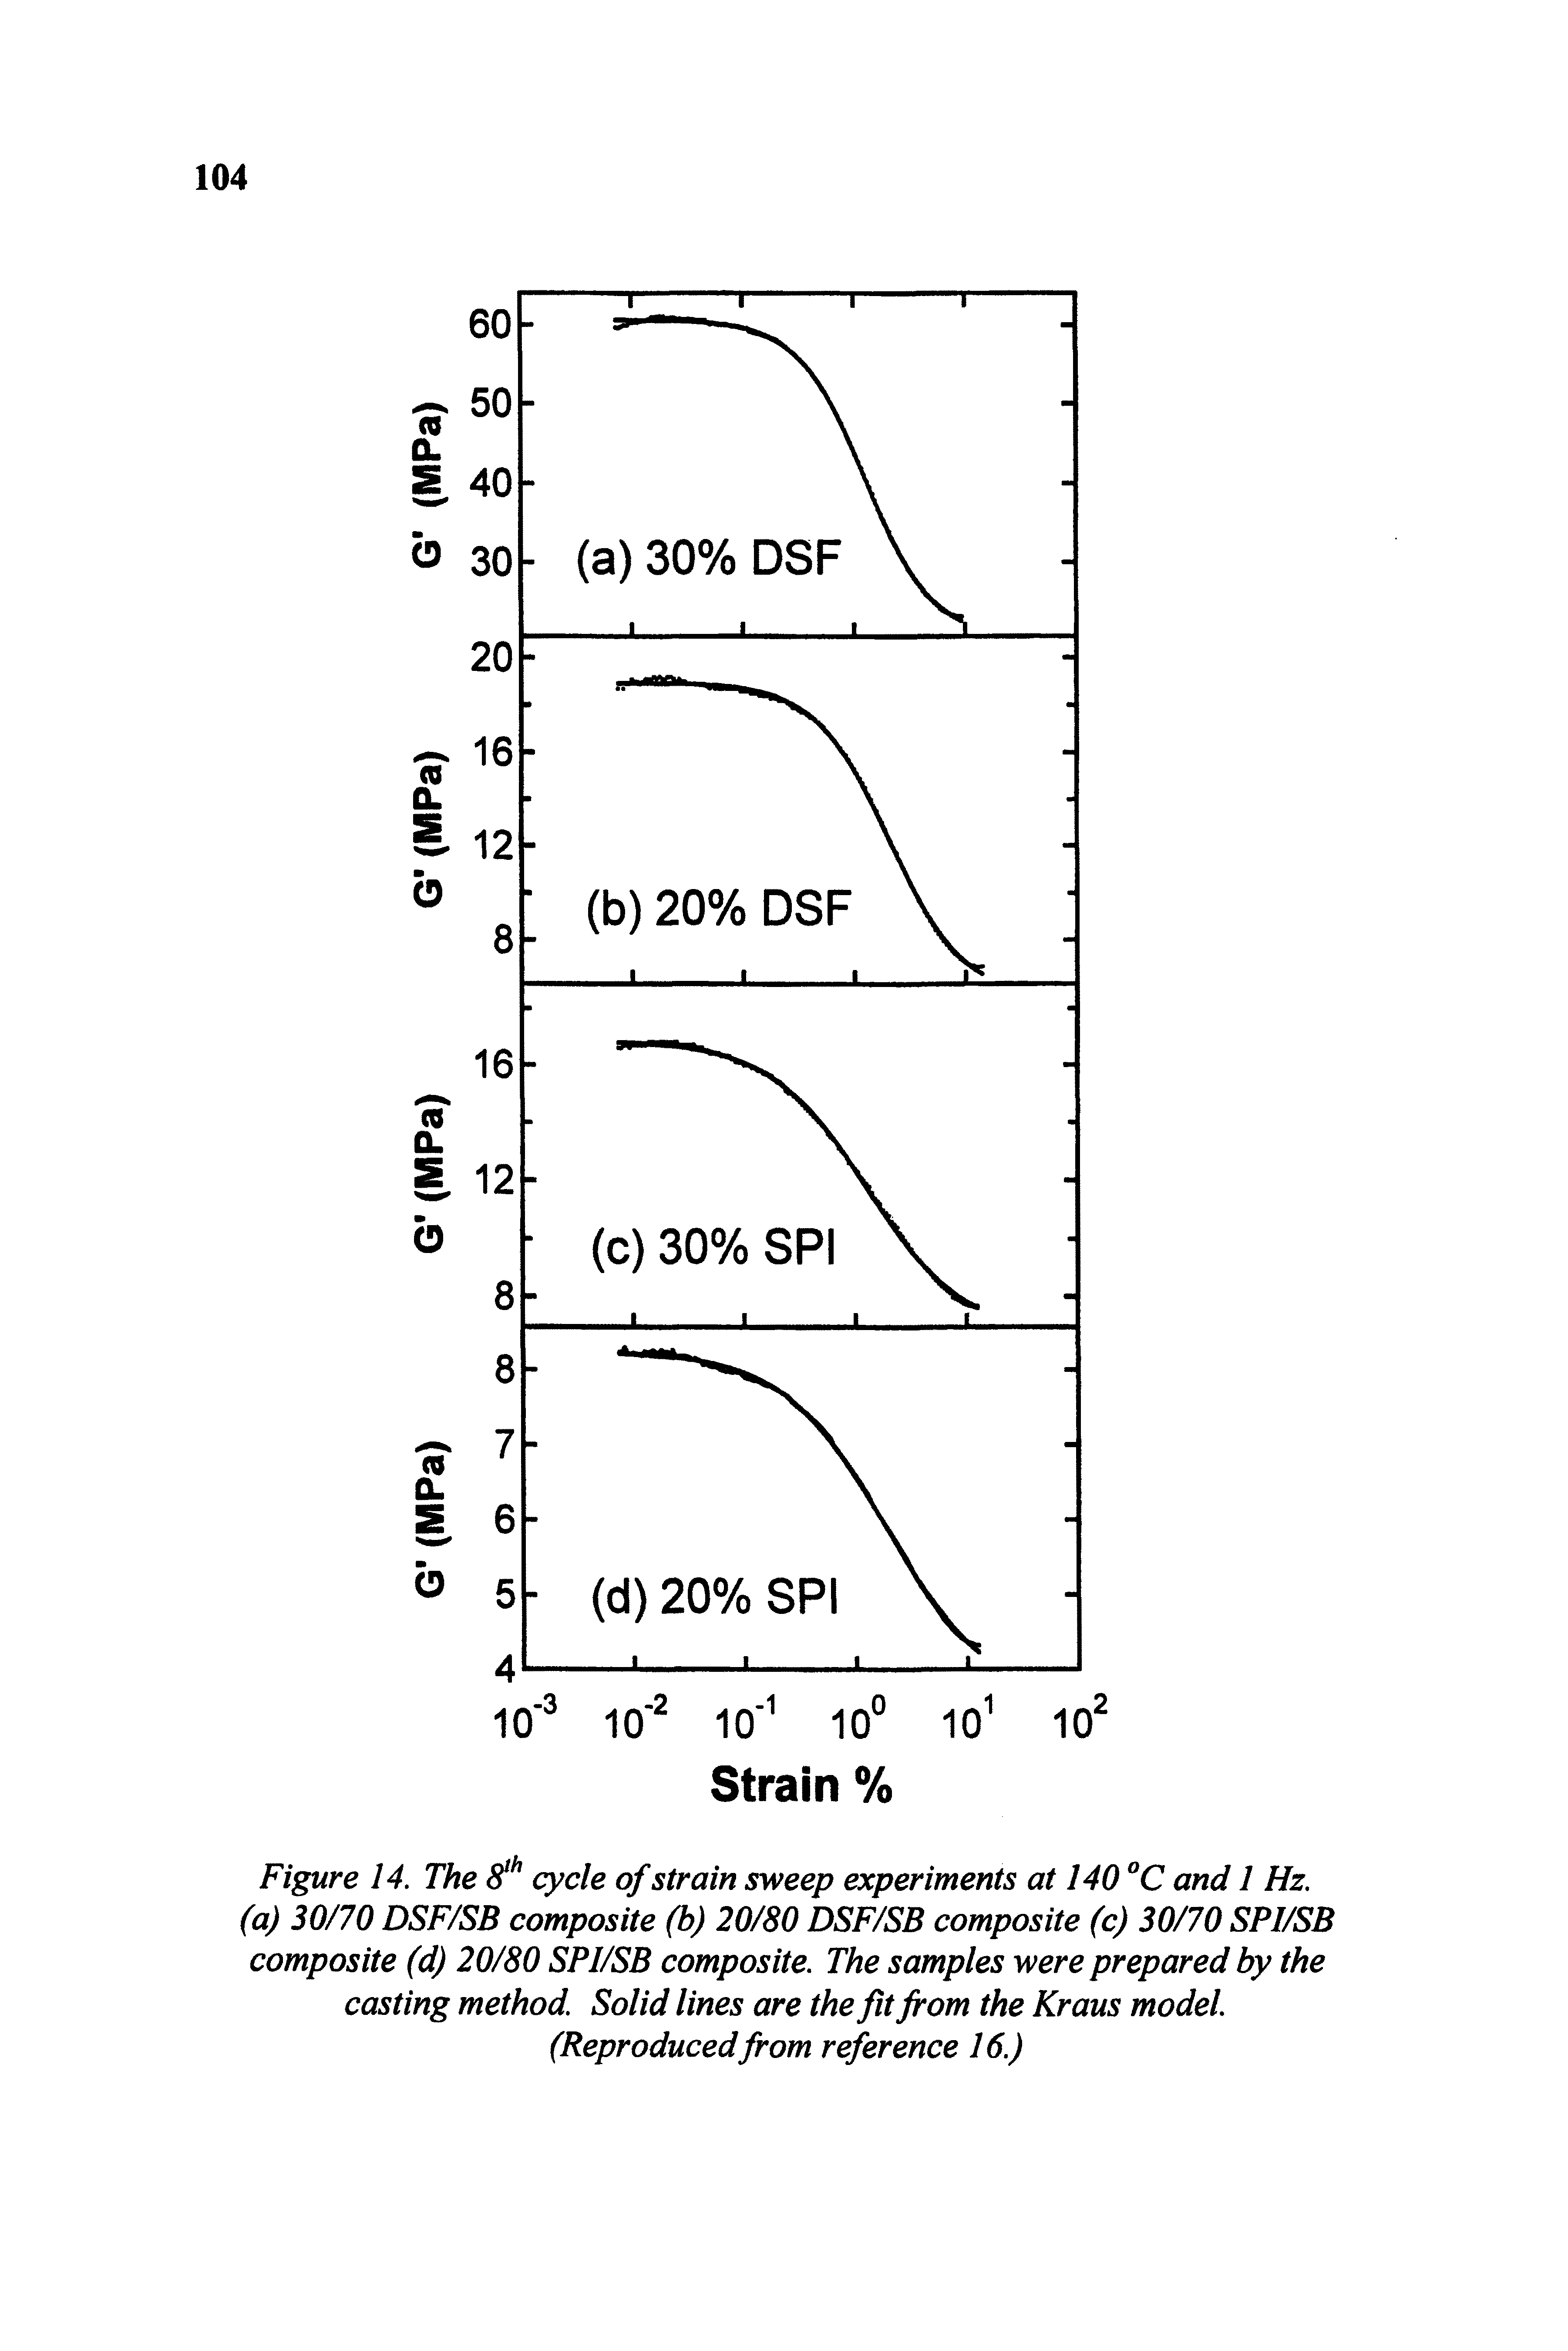 Figure 14. The 8 cycle of strain sweep experiments at 140 °C and 1 Hz. (a) 30/70 DSF/SB composite (b) 20/80 DSF/SB composite (c) 30/70 SPI/SB composite (d) 20/80 SPI/SB composite. The samples were prepared by the casting method. Solid lines are the fit from the Kraus model. (Reproducedfrom reference 16.)...